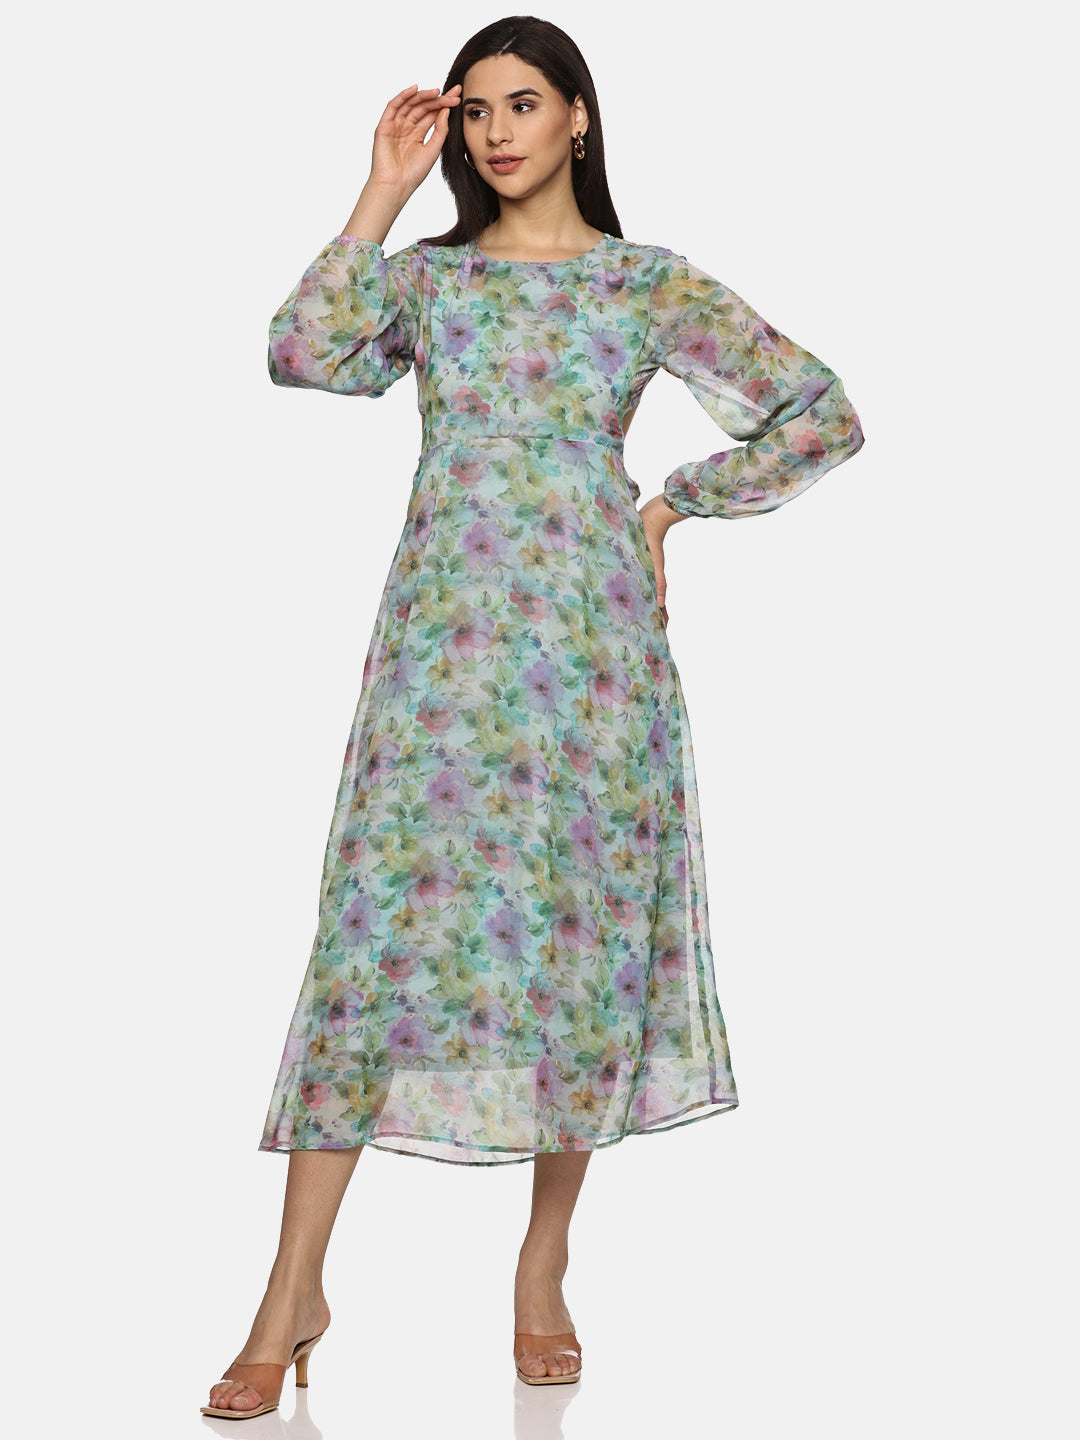 Buy Multicolor Printed Floral Chiffon Fabric | Cut Out Midaxi Dress Online In India